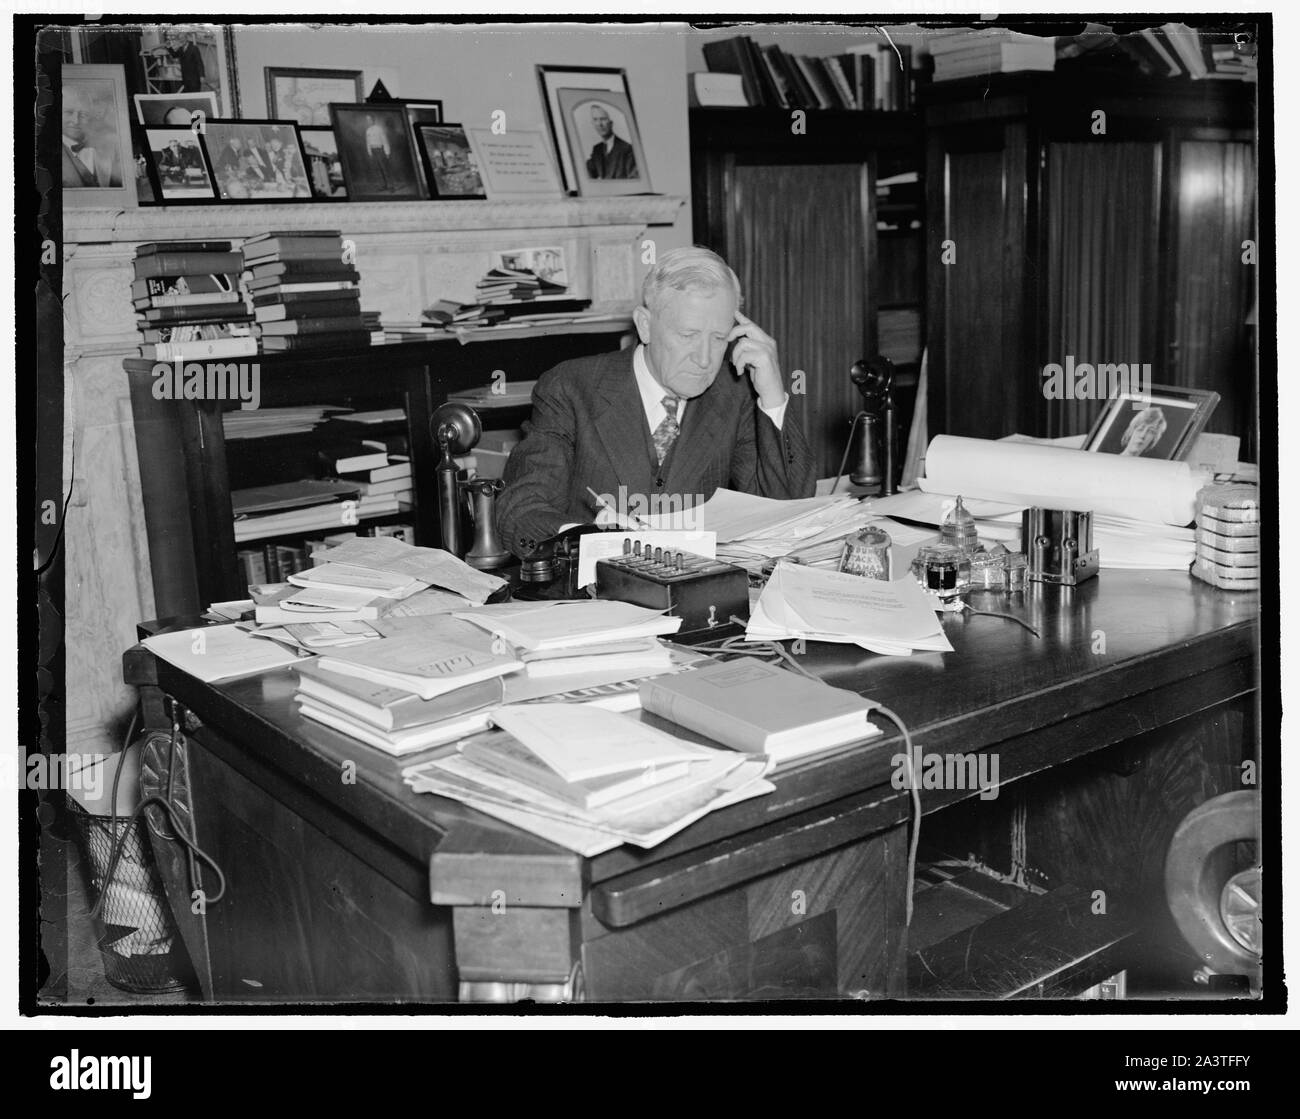 Texas senator. Washington, D.C., Nov. 4. The veteran U.S. Senator from Texas, Morris Sheppard is busily engaged these days preparing for the opening of the special session Congress on November 15. This picture was made at Senator's office today. 11/4/37 Stock Photo